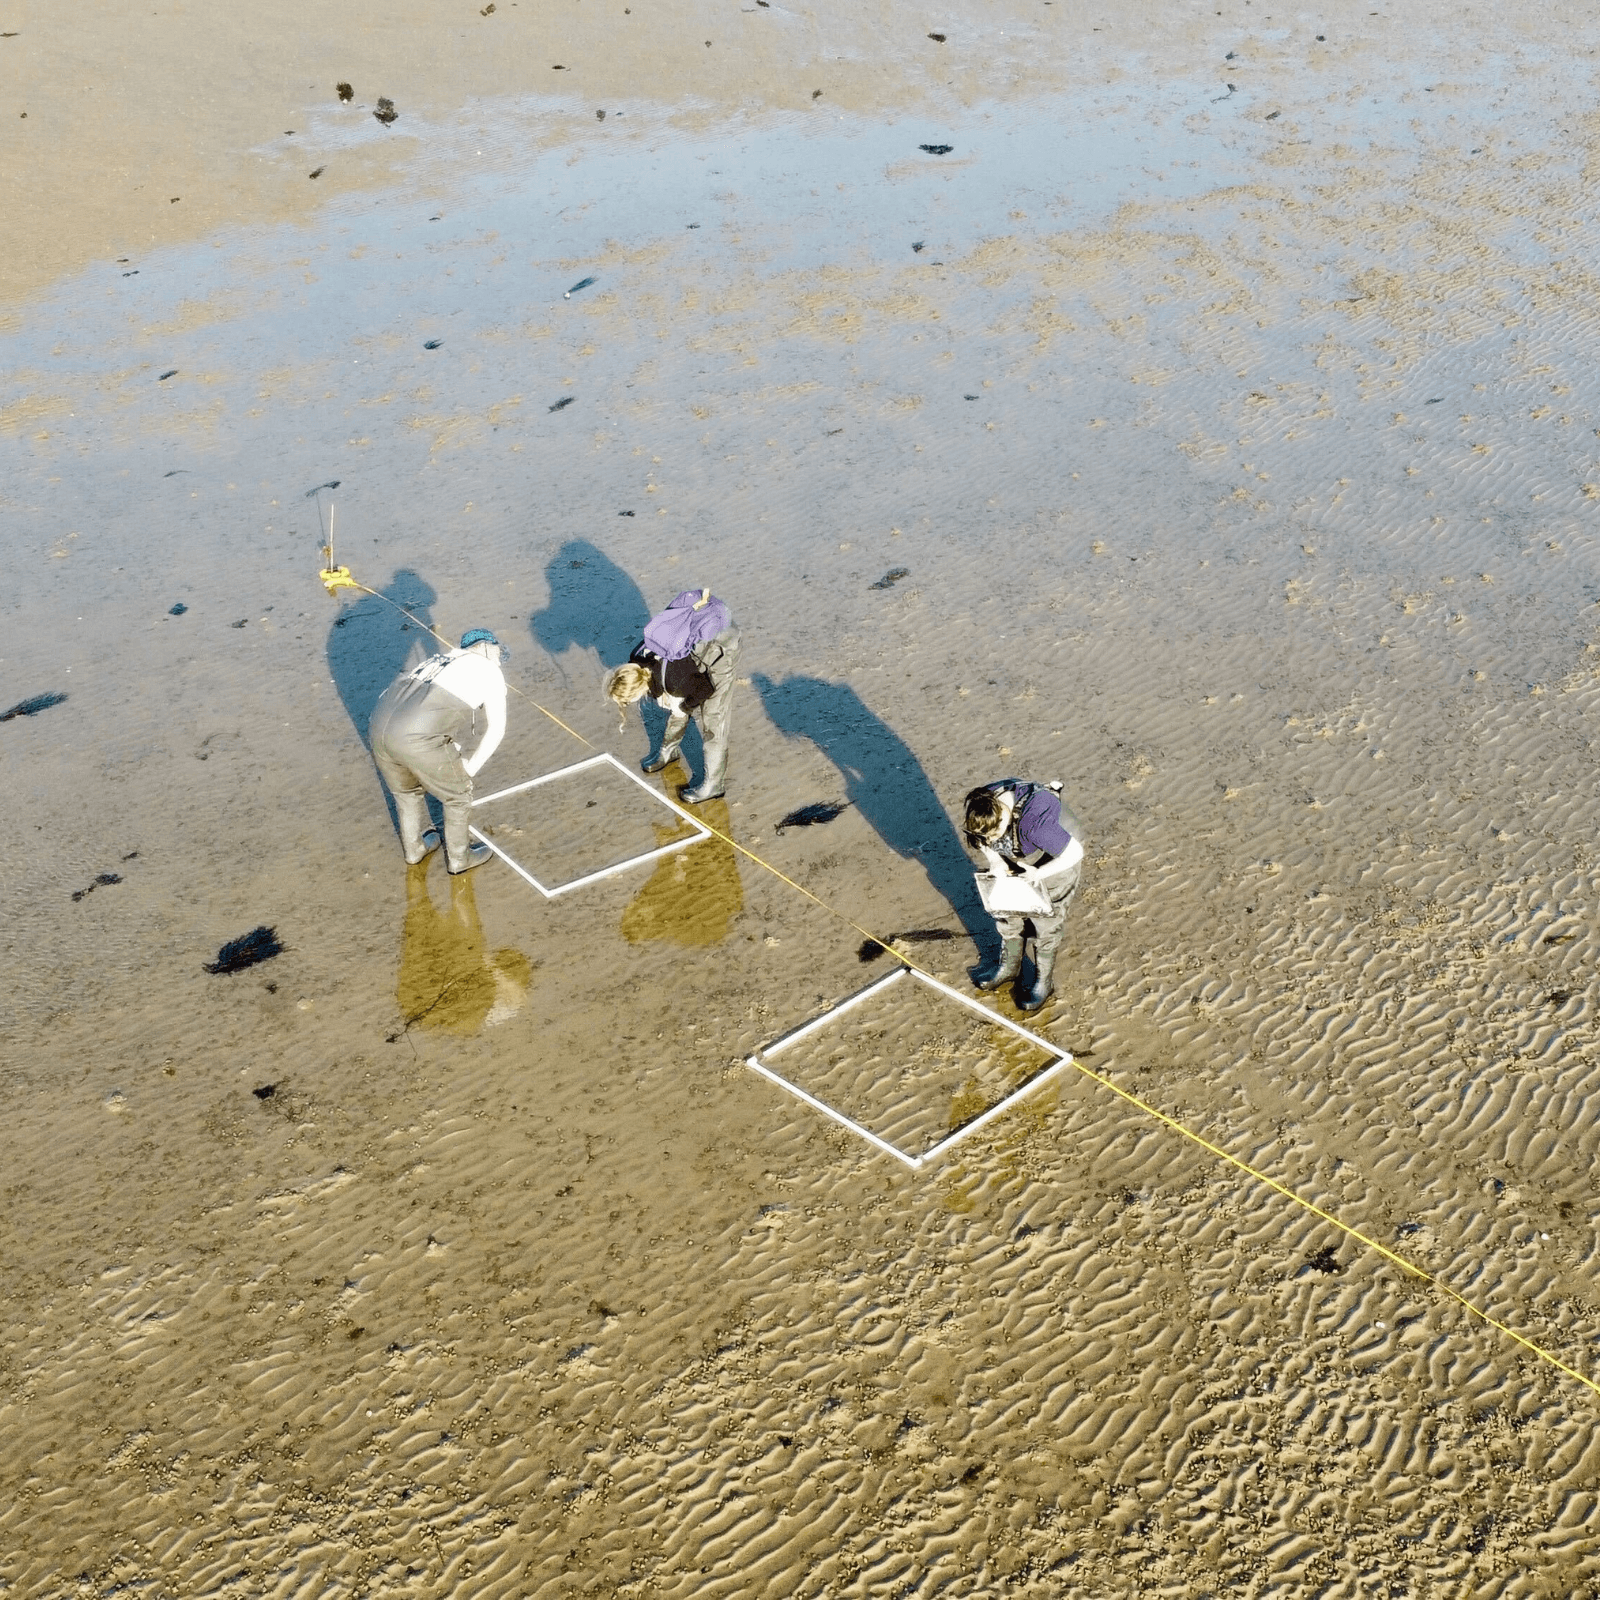 Three members of Project Seagrass staff are standing along a transect line gathering quadrat data on a beach in the Isle of Wight as part of our May fieldwork